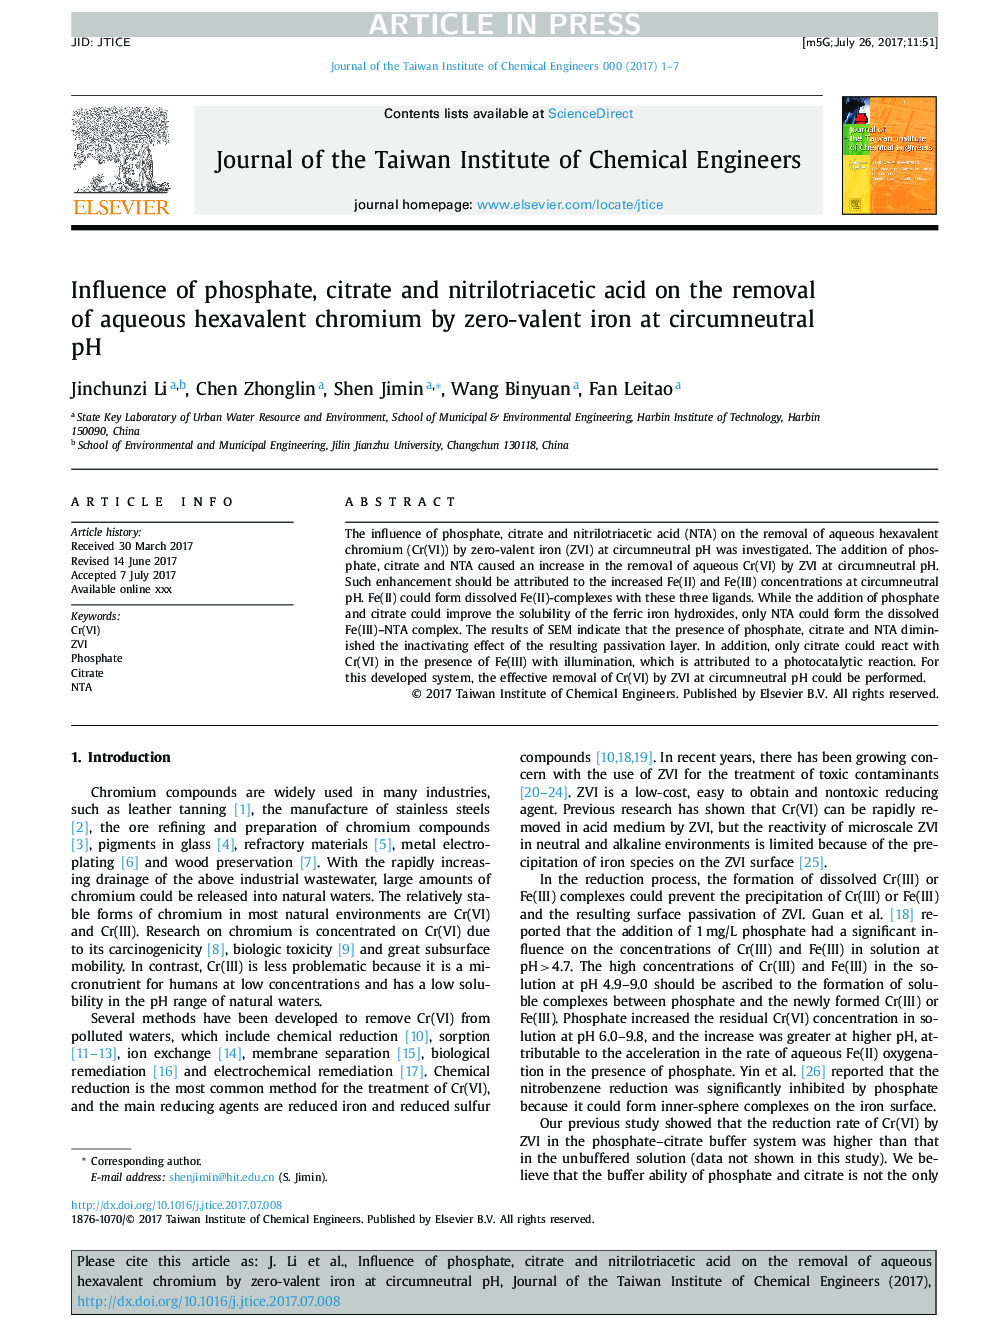 Influence of phosphate, citrate and nitrilotriacetic acid on the removal of aqueous hexavalent chromium by zero-valent iron at circumneutral pH